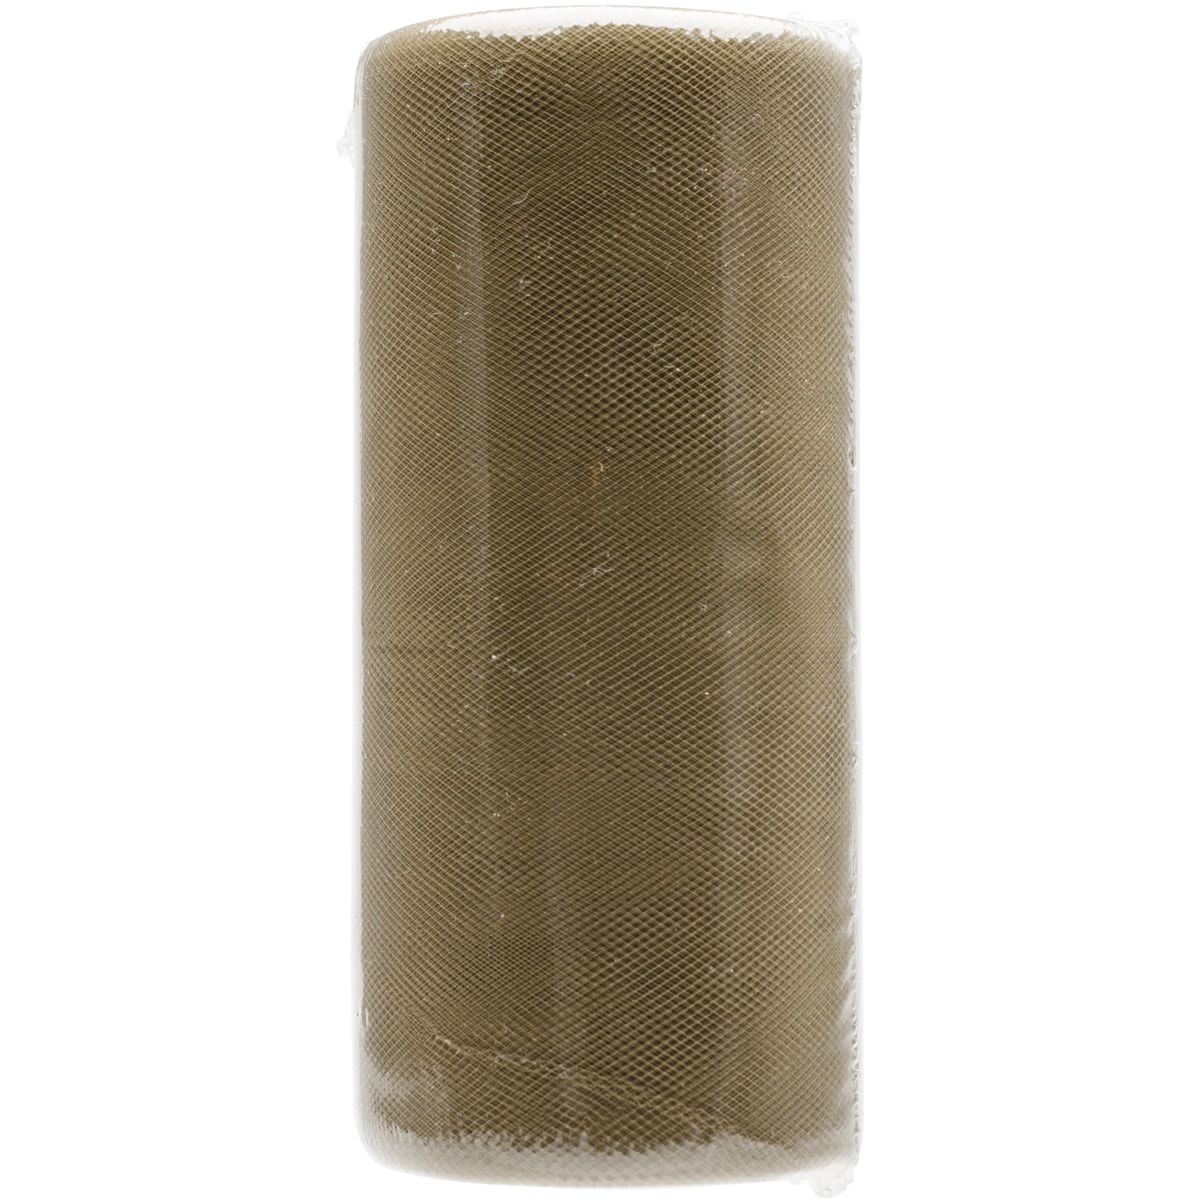 Tulle 6" Wide 25yd Spool-Antique Gold, Pk 3, Falk - image 2 of 2